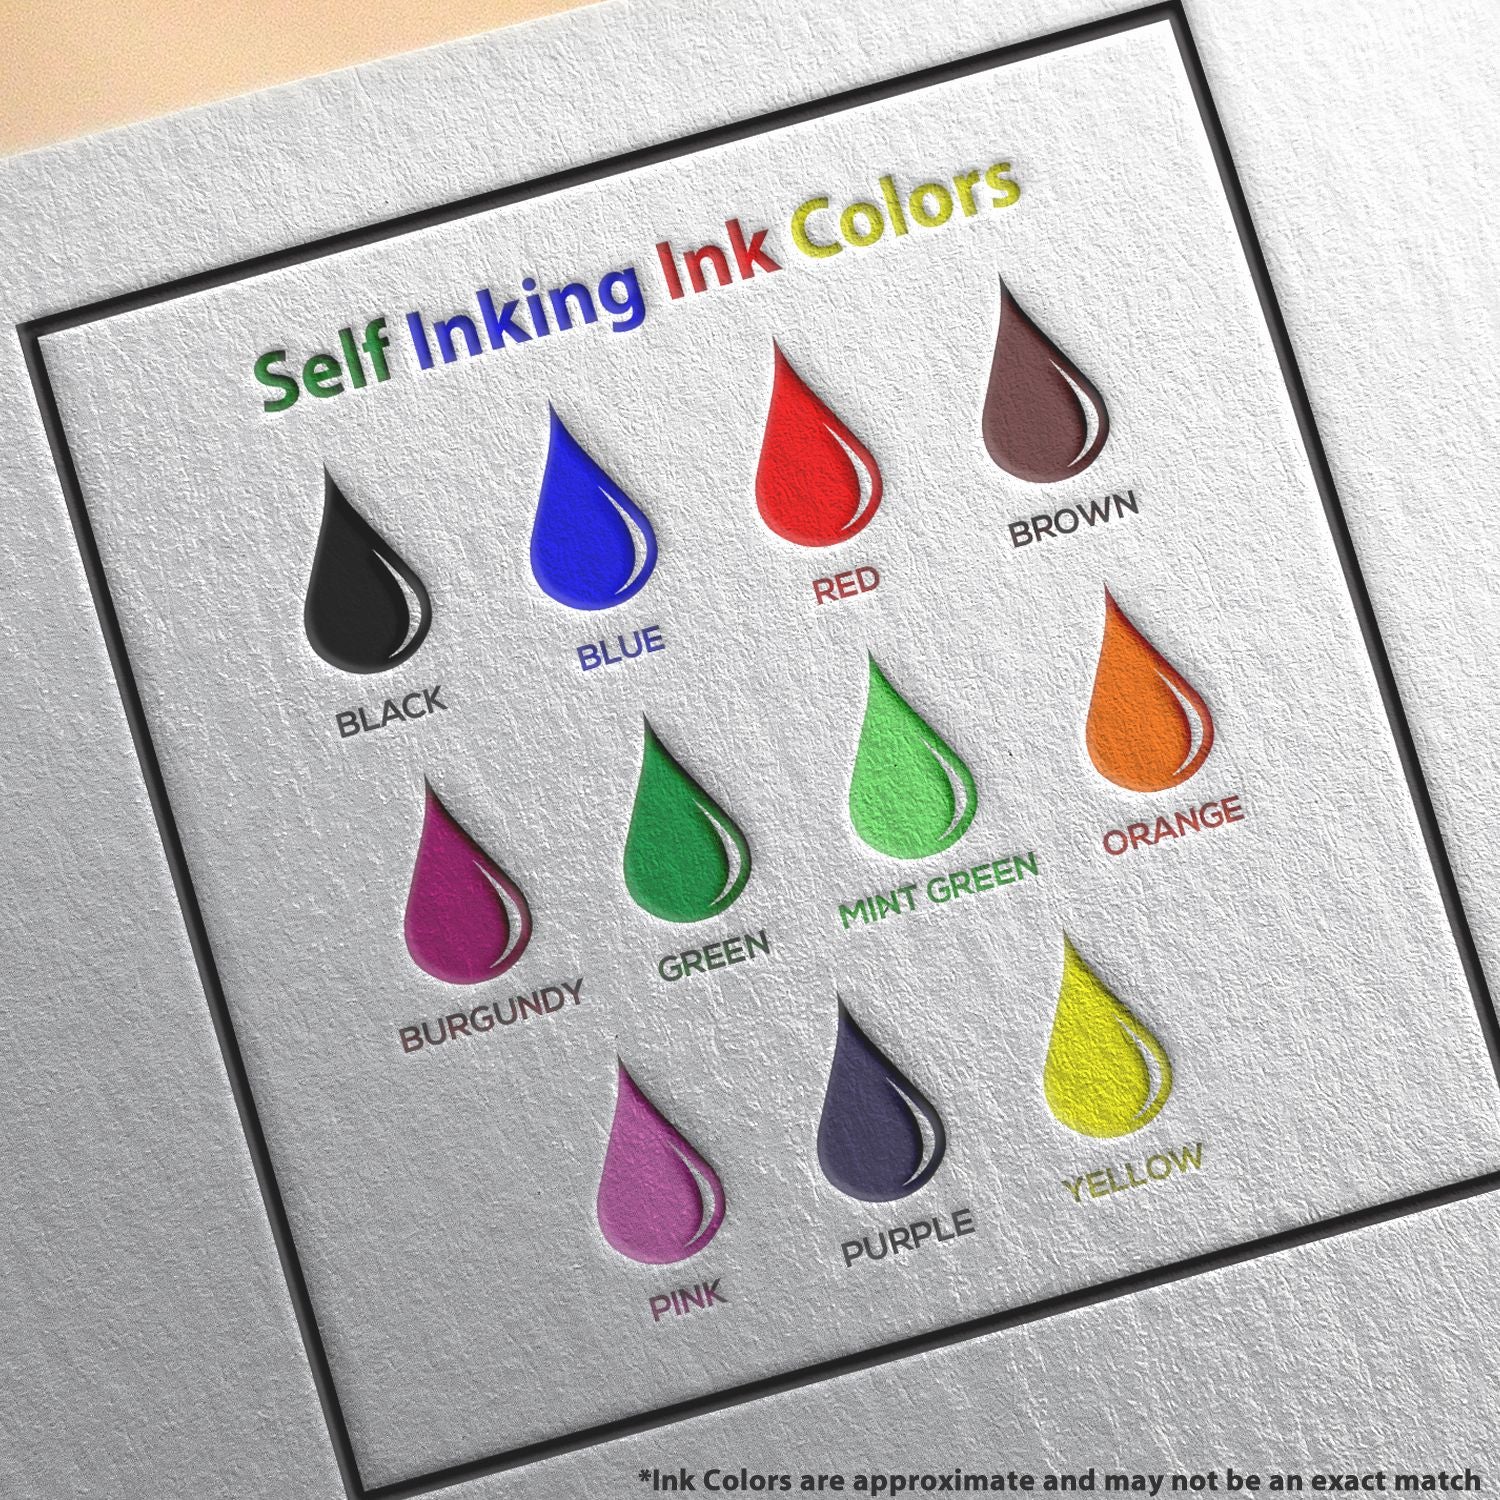 A picture showing the different ink colors or hues available for the Self-Inking Mississippi PE Stamp product.